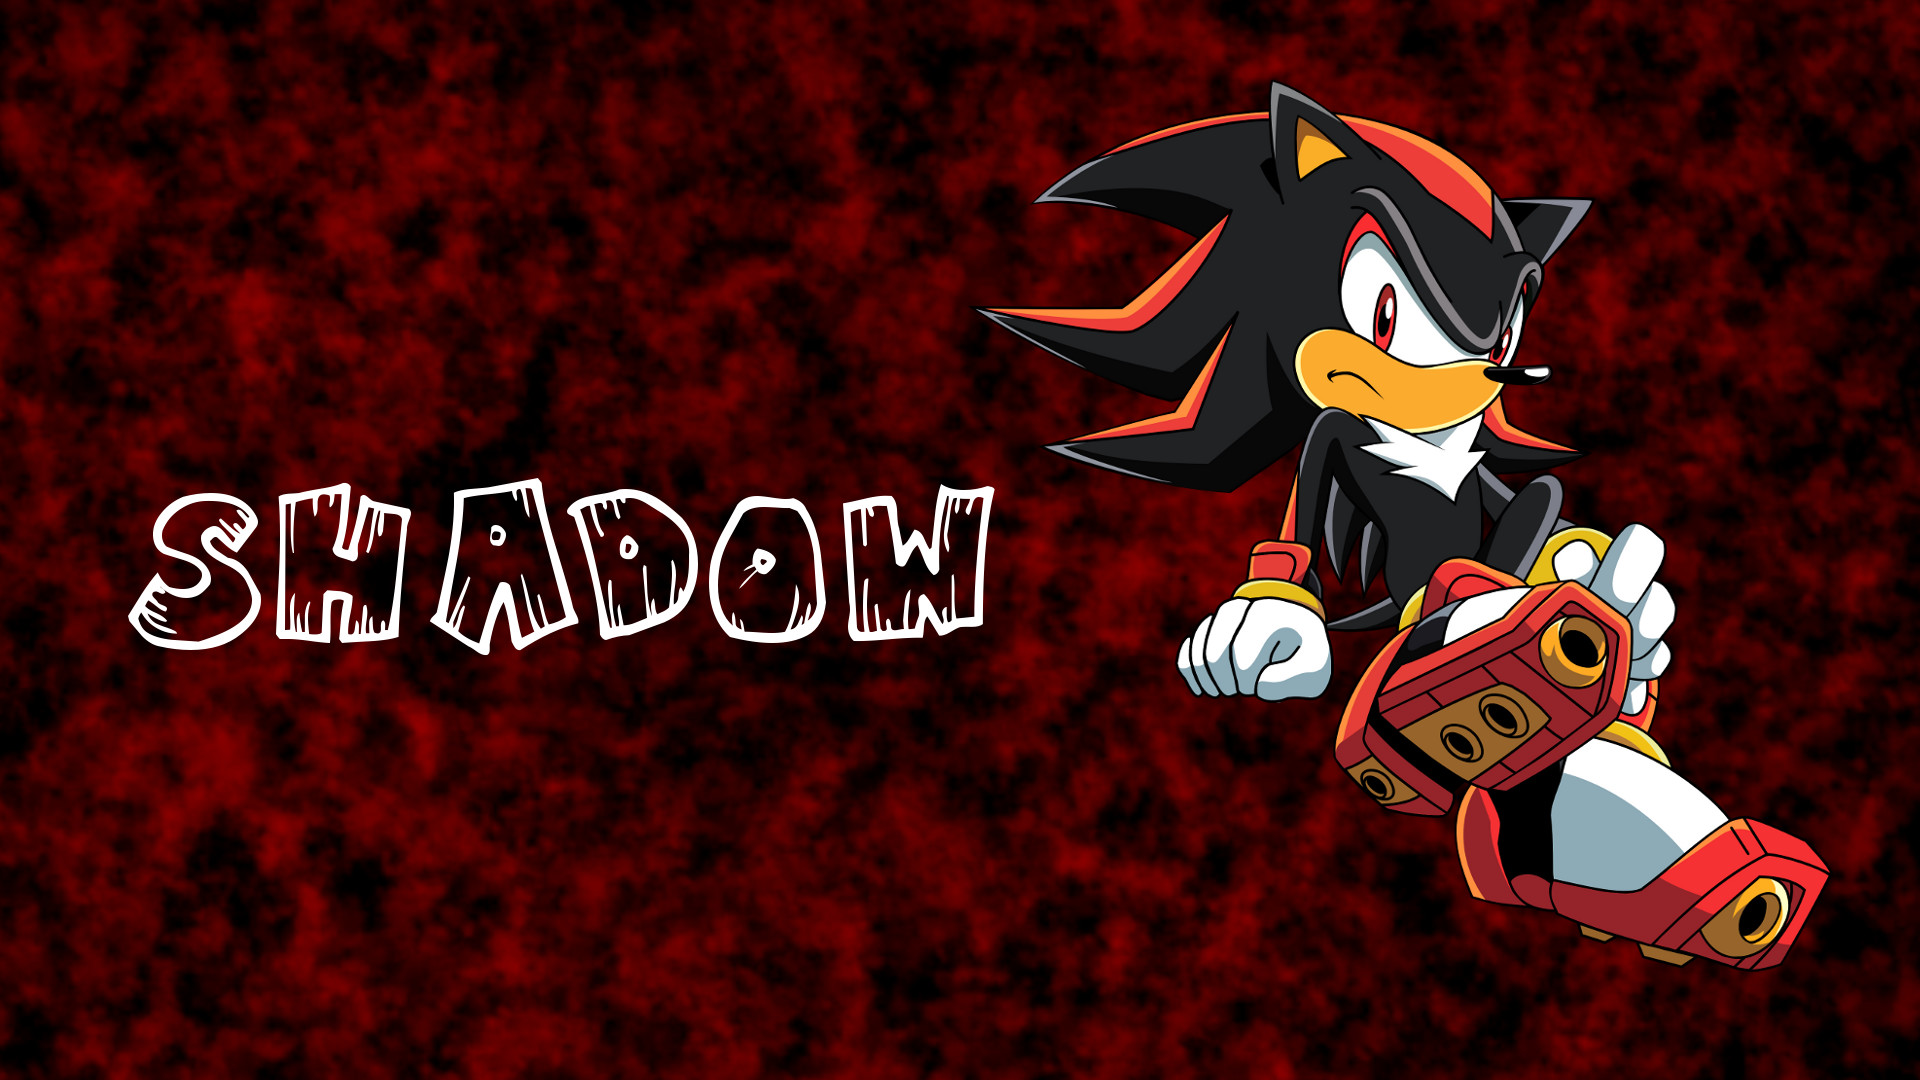 1920x1080 Full HD Images Collection: Sonic X, by Joellen Hendricks